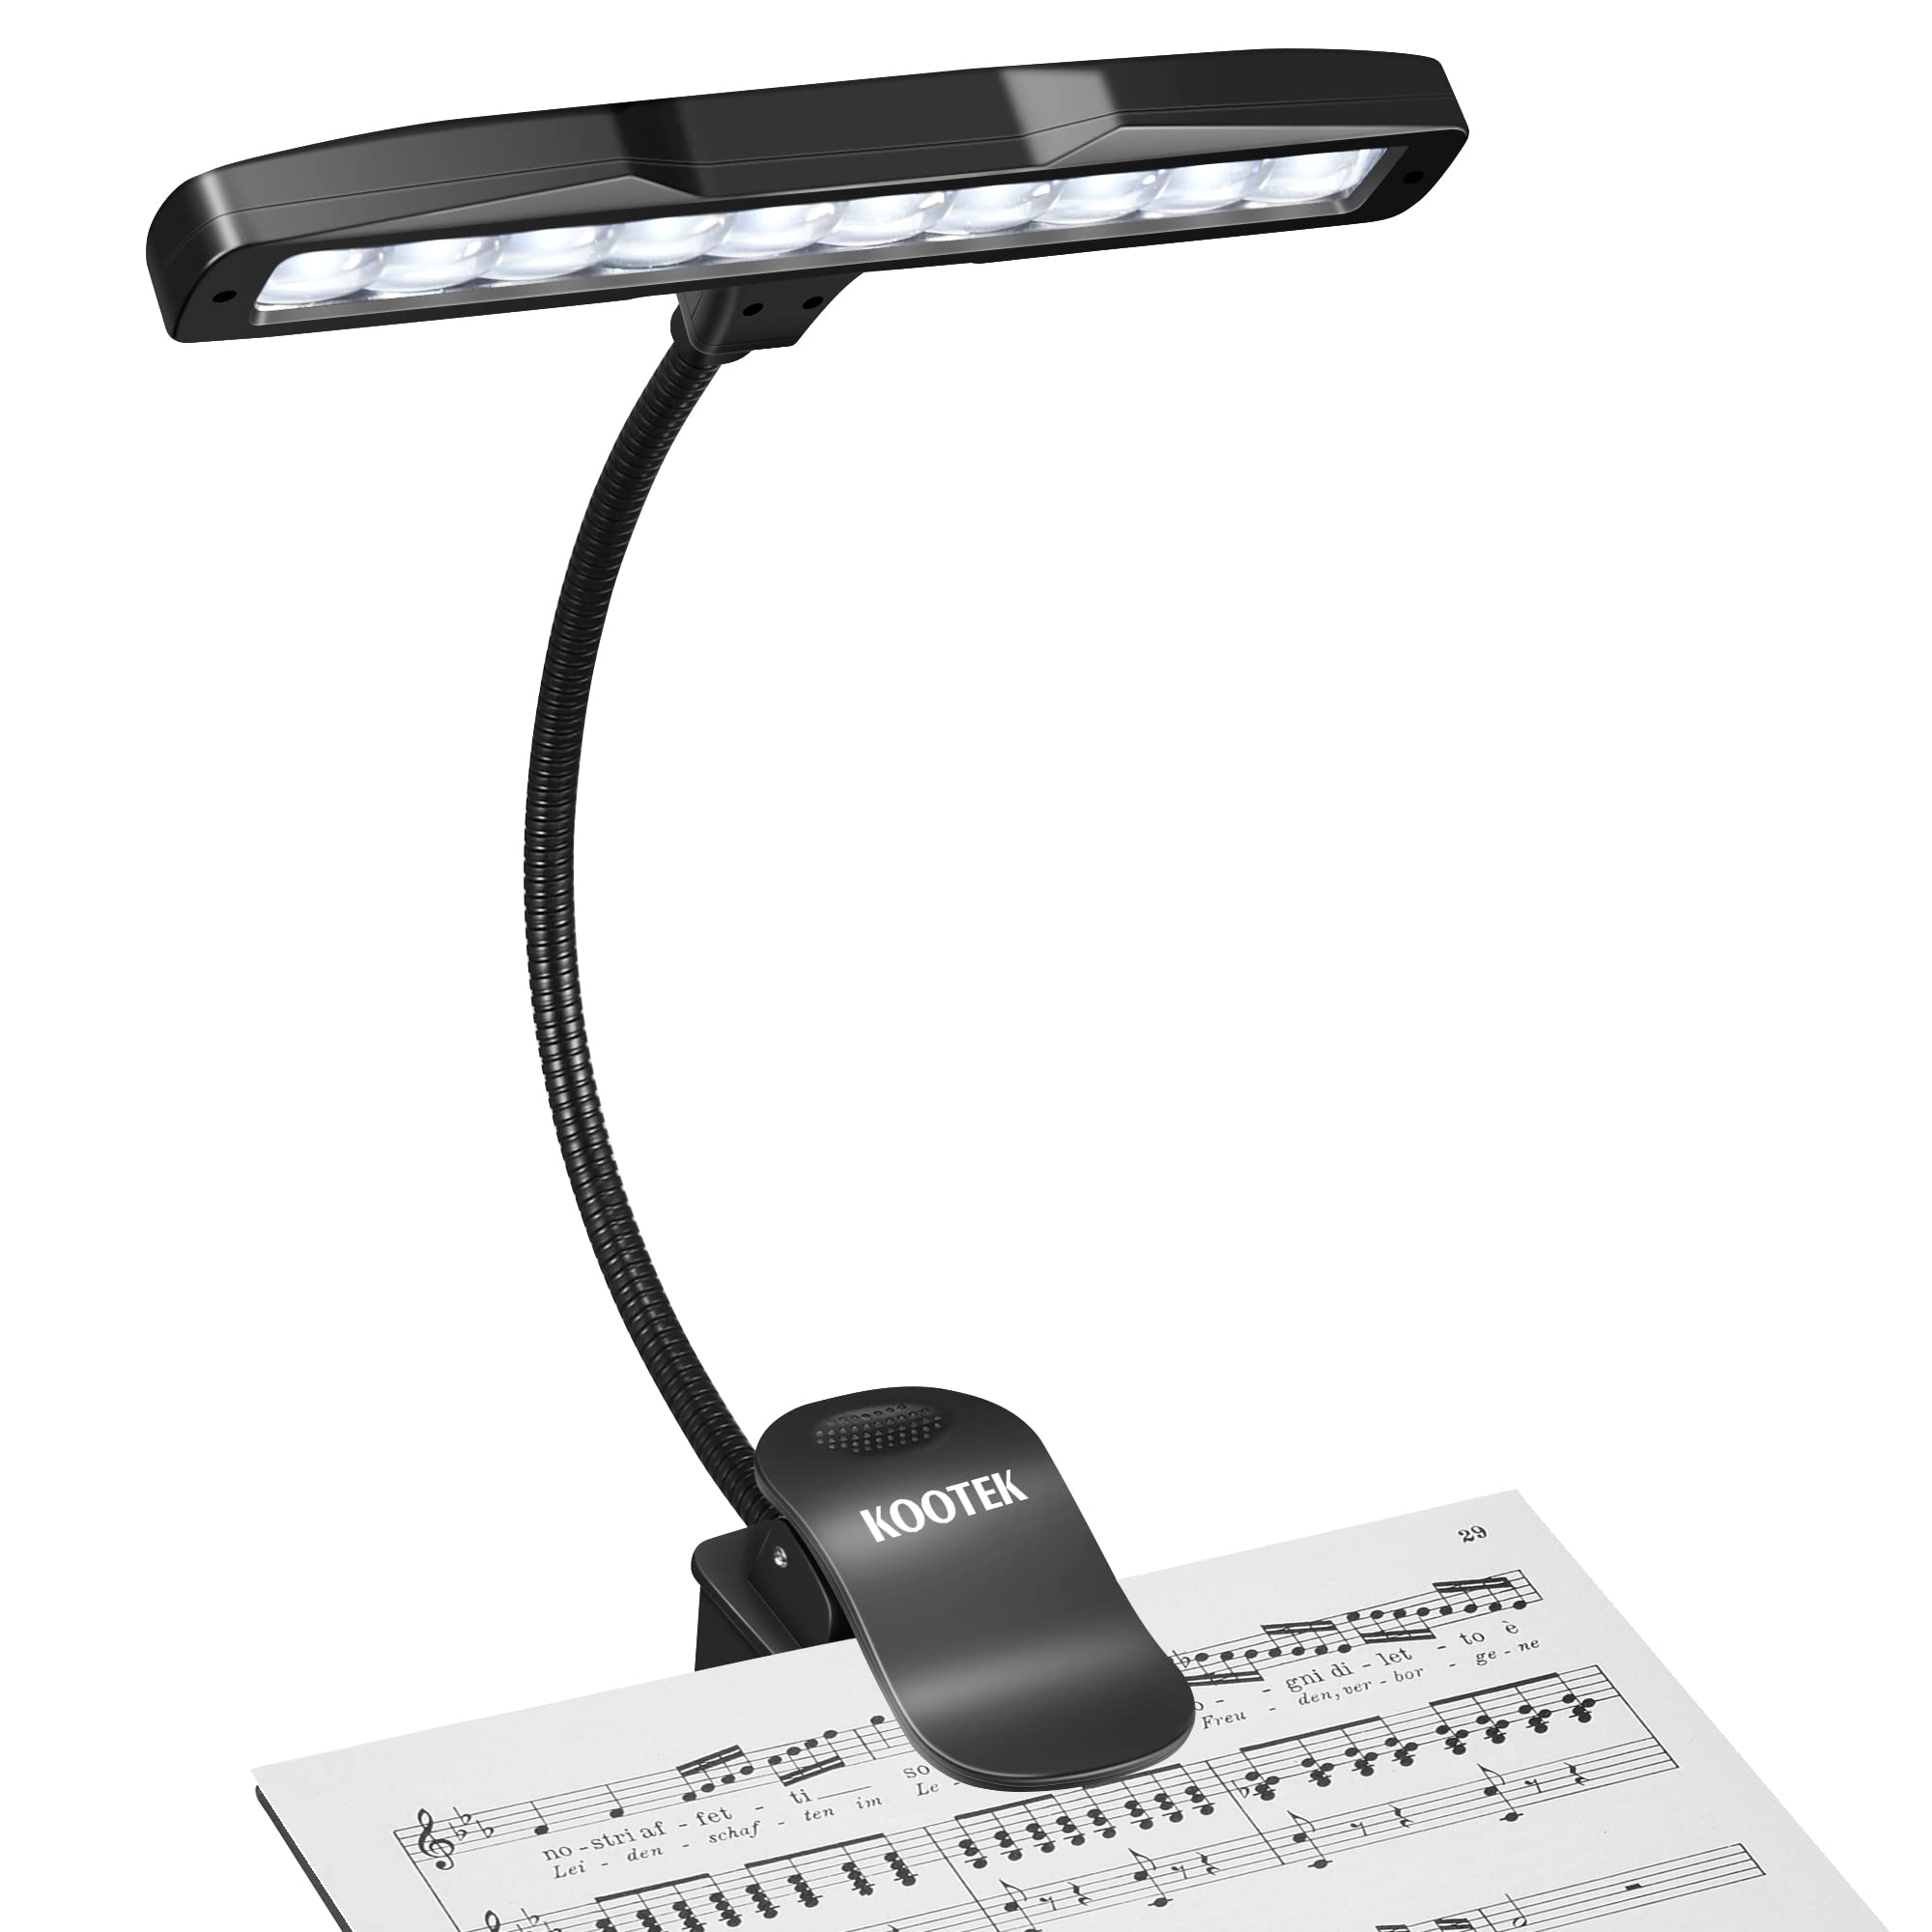 Kootek Music Stand Light, Clip On Piano Lights 10 LED Adjustable Neck Rechargeable USB Orchestra Light Book Lamp